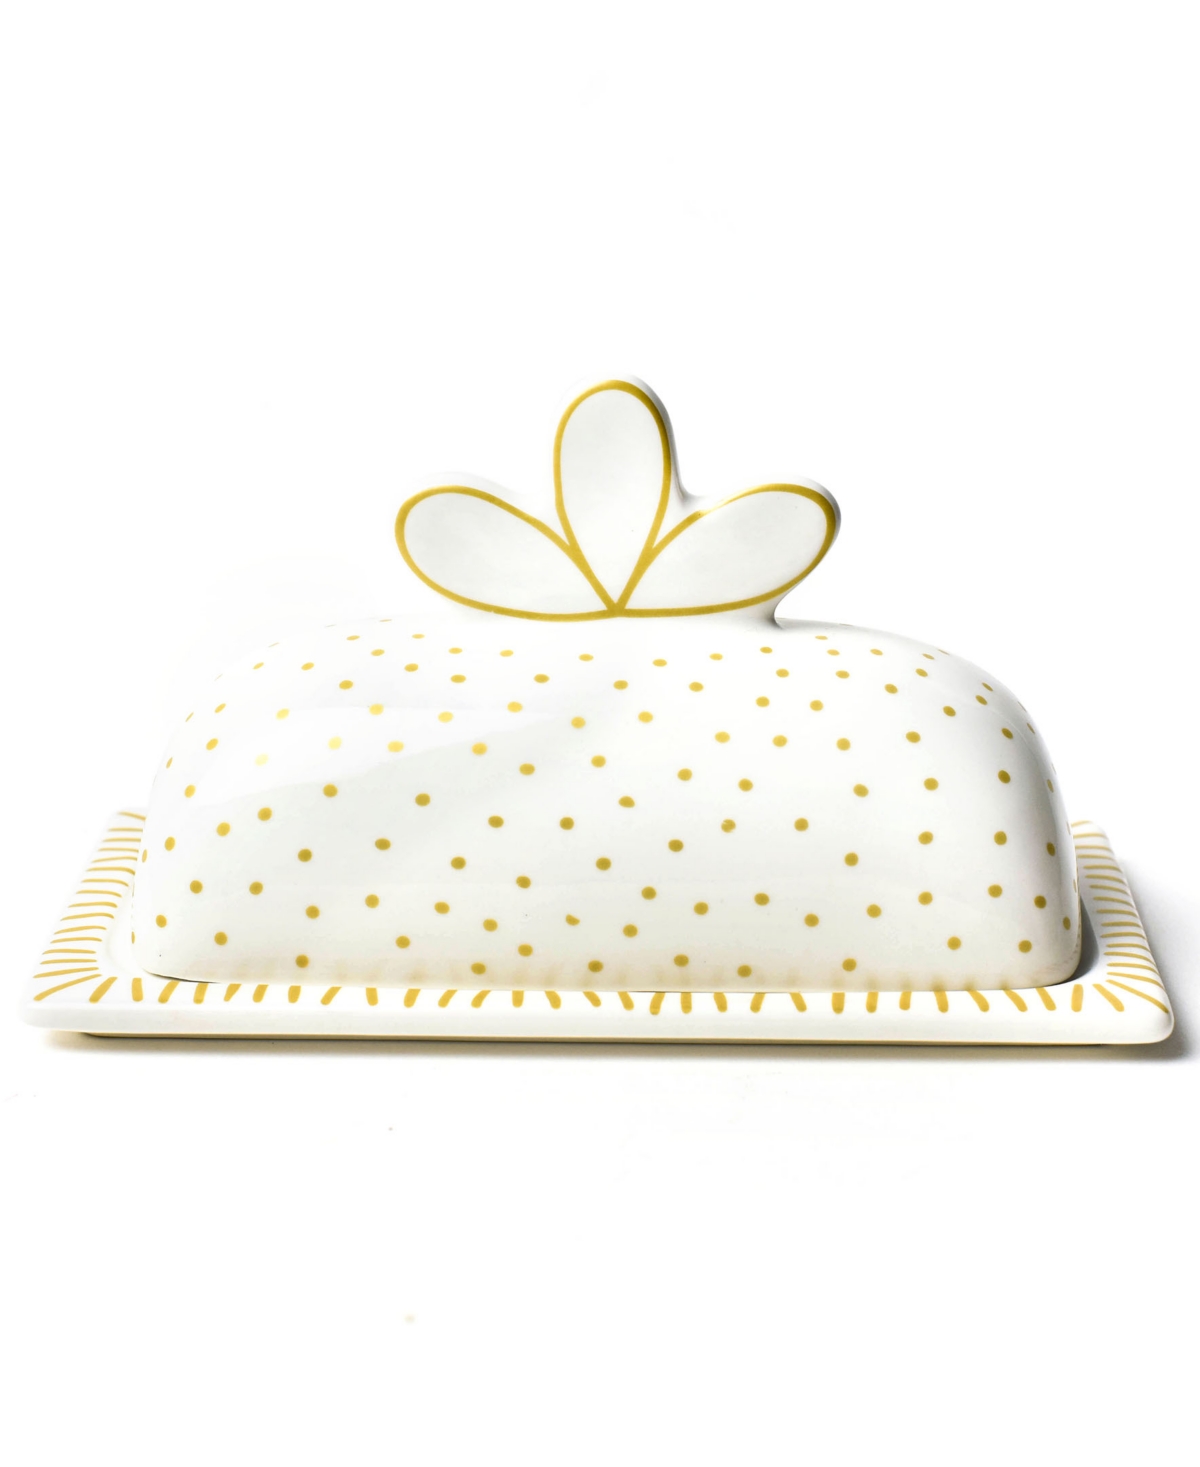 Coton Colors By Laura Johnson Deco Gold Scallop Knob Butter Dish In White And Gold